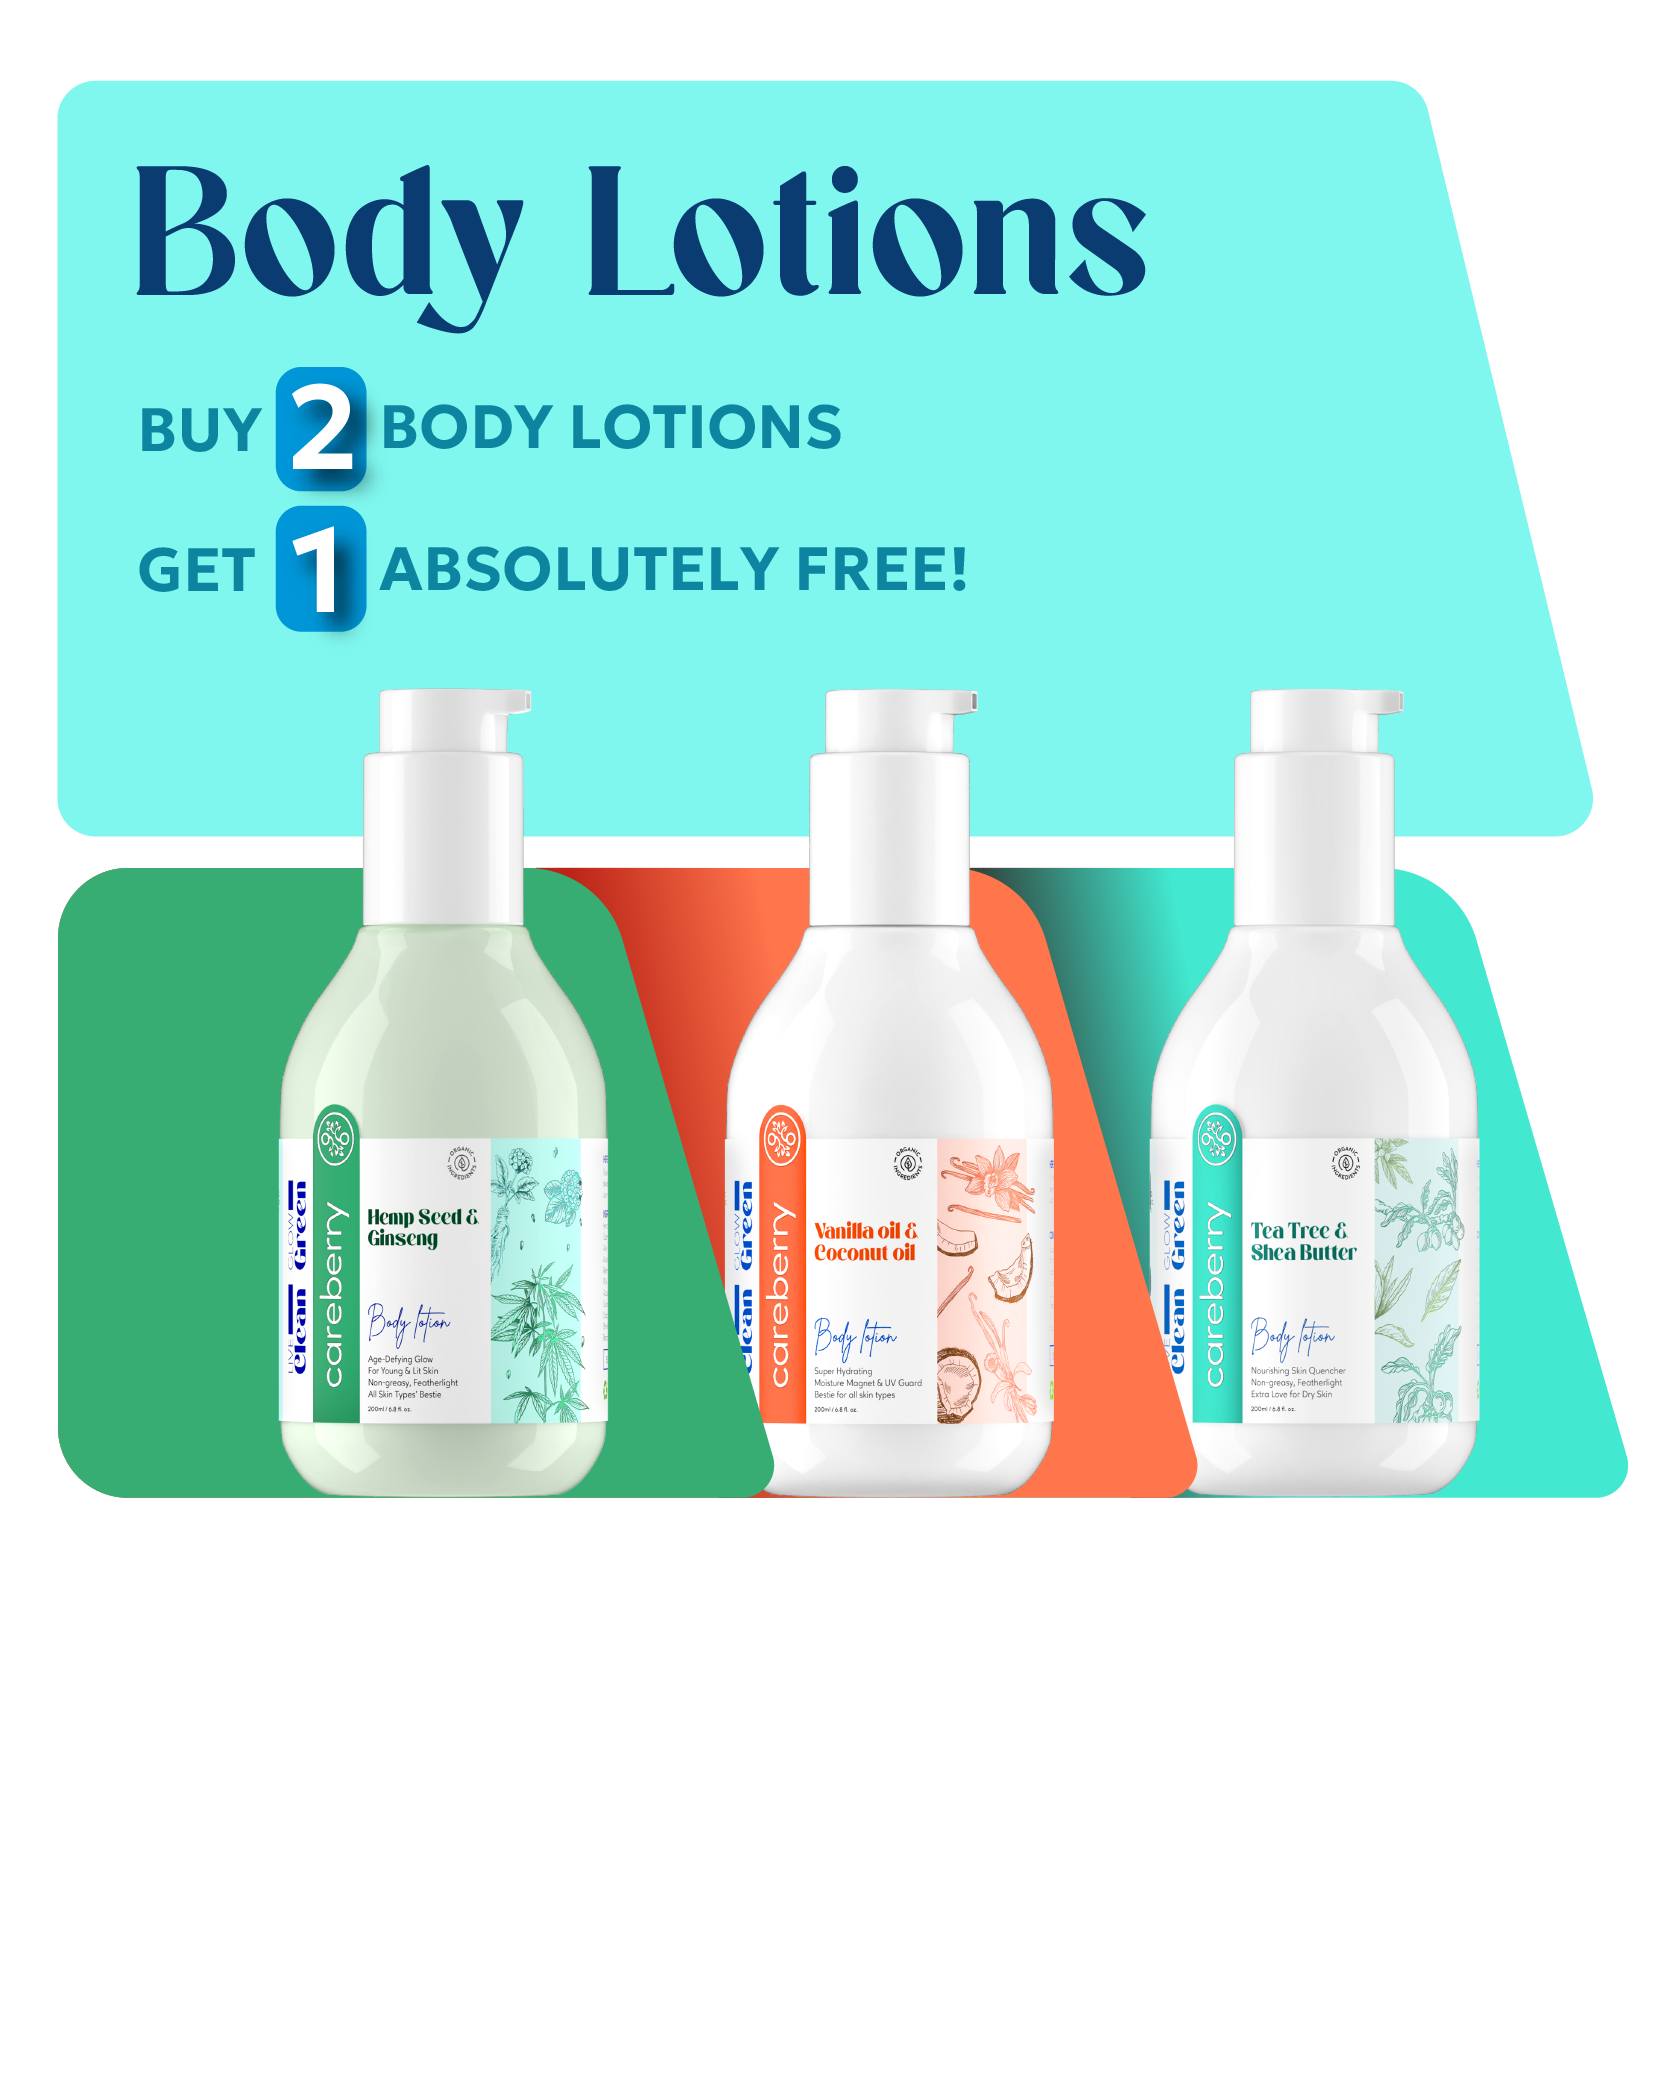 Buy 2 body lotions of Careberry and get 1 free